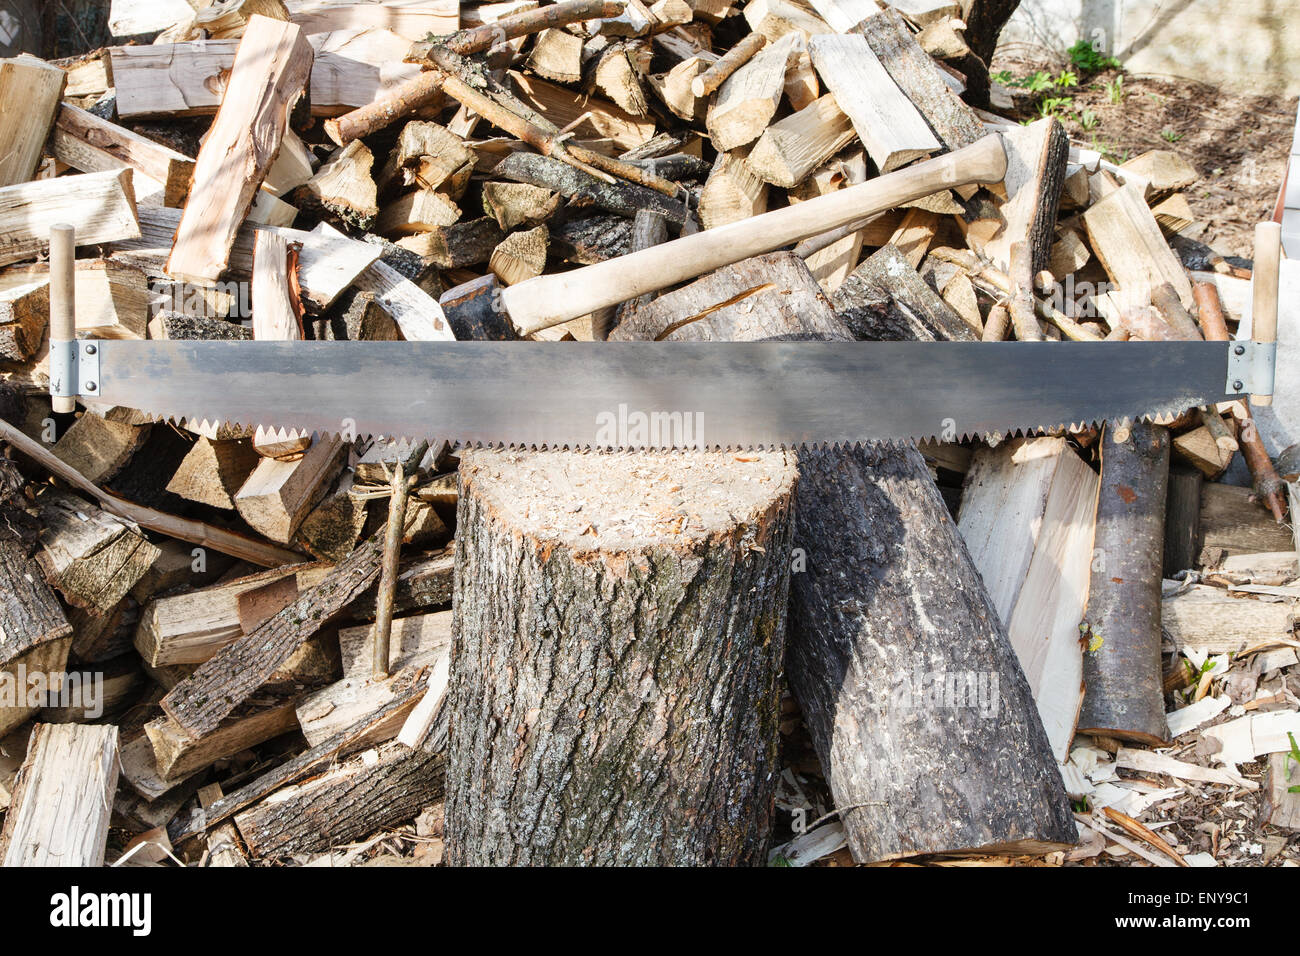 two-handled saw and ax in chopping block, pile of firewood on rustic courtyard Stock Photo